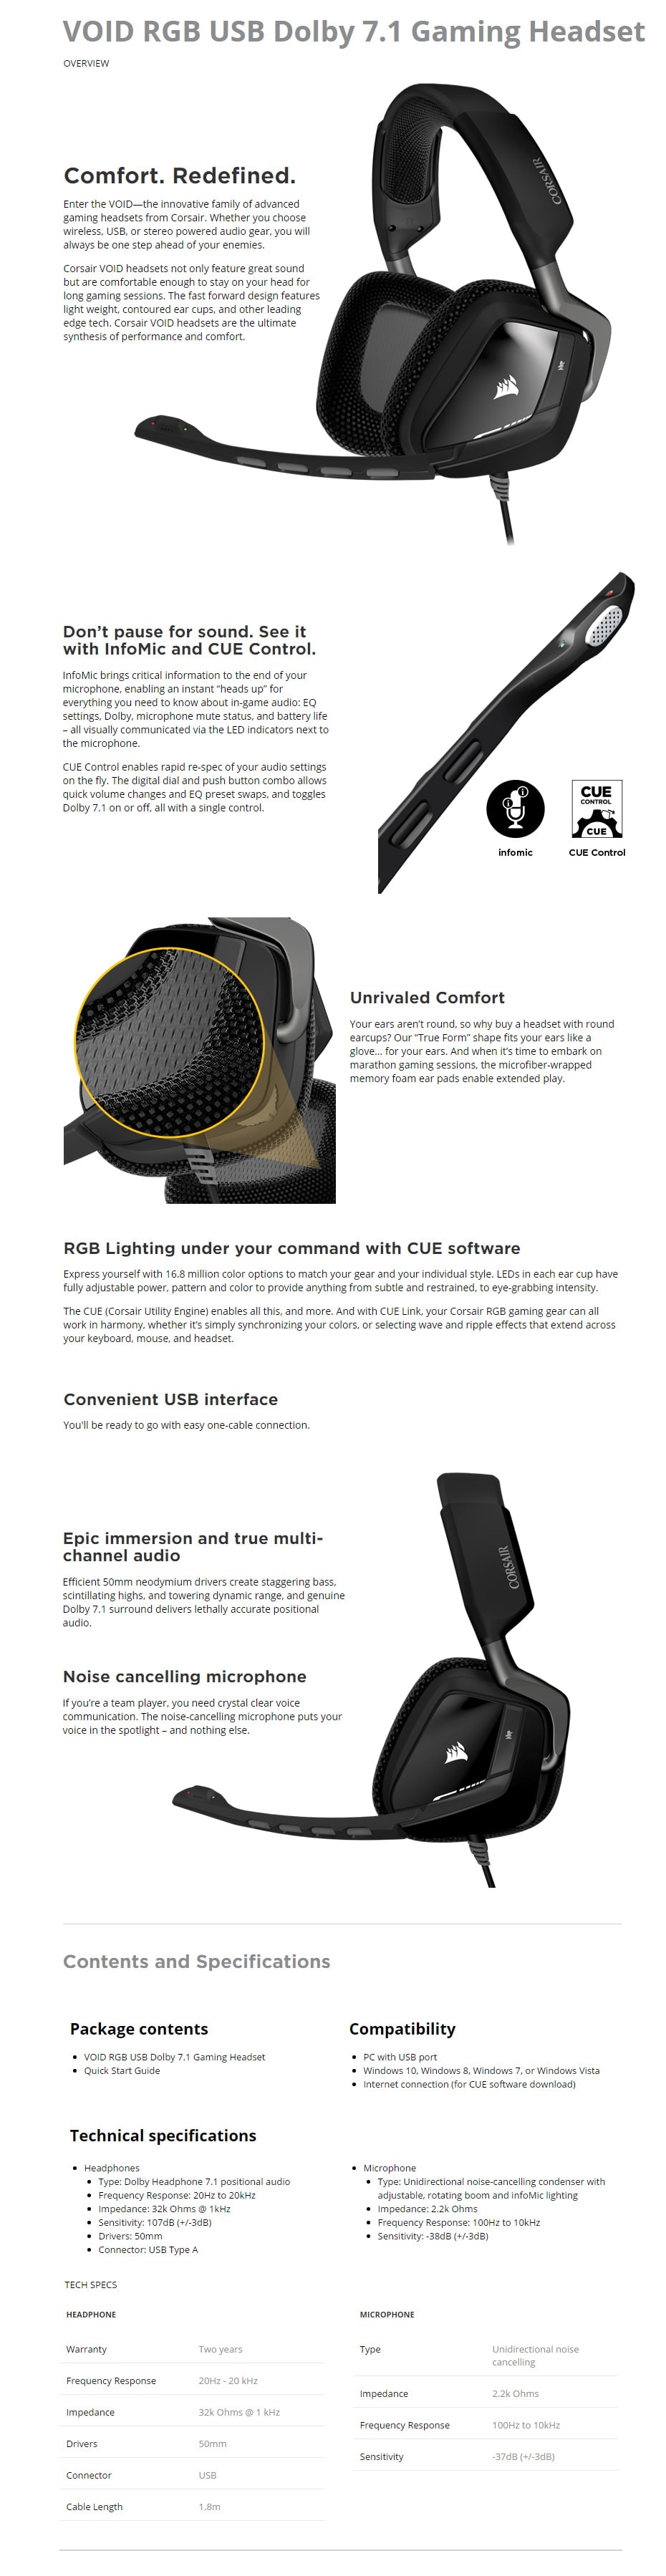 Corsair VOID RGB USB Dolby 7.1 Gaming Headset features